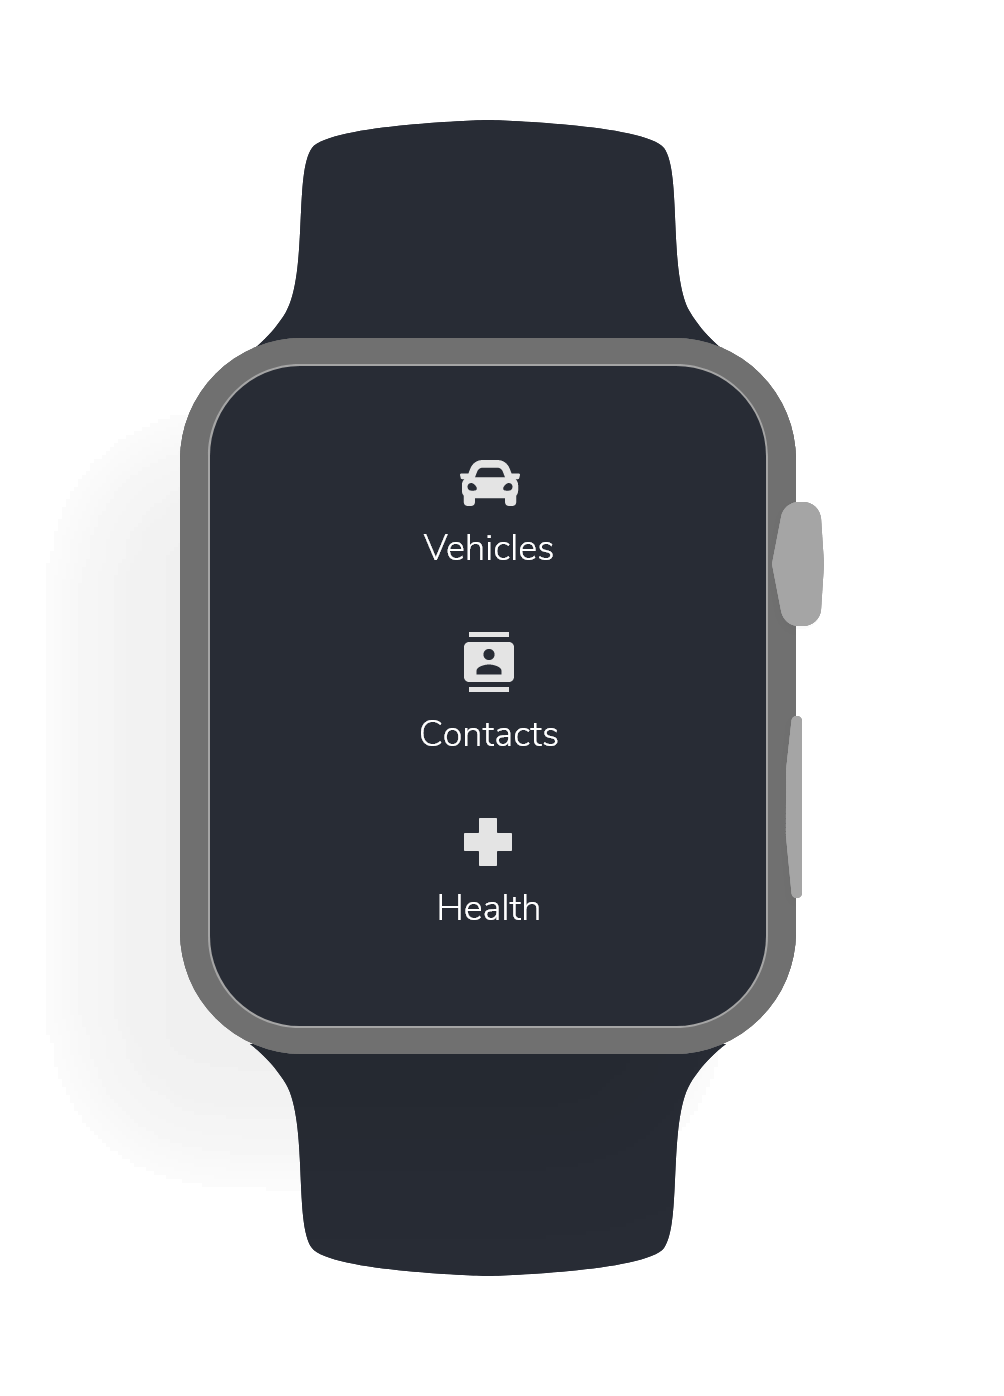 A quick mockup of how simplified the interface might be on a smart watch